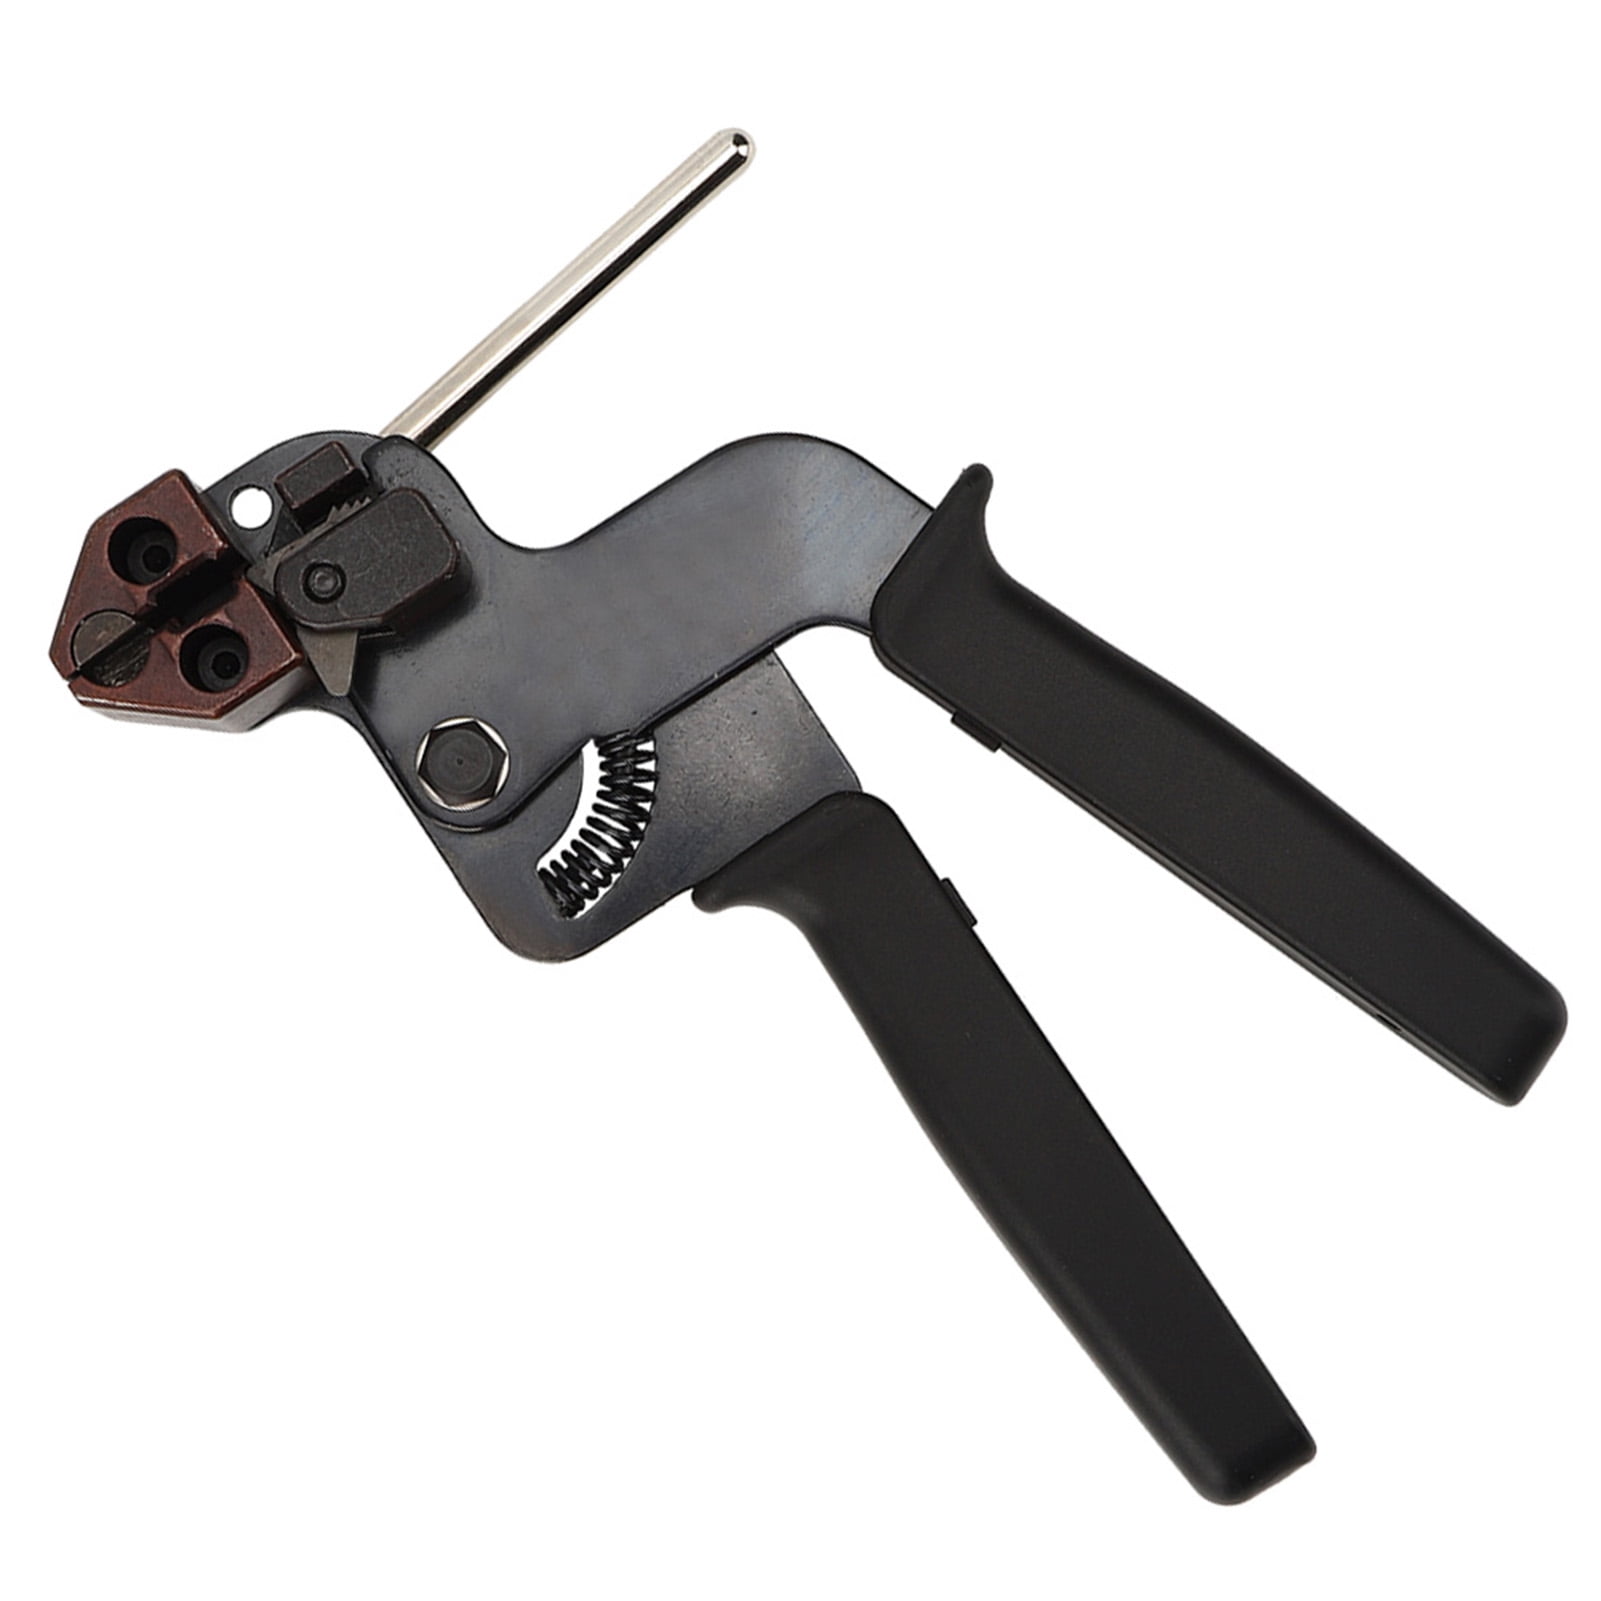 Cable Tie Fasten Gun Pliers Crimper Tensioner Cutter Stainless Steel Tools 